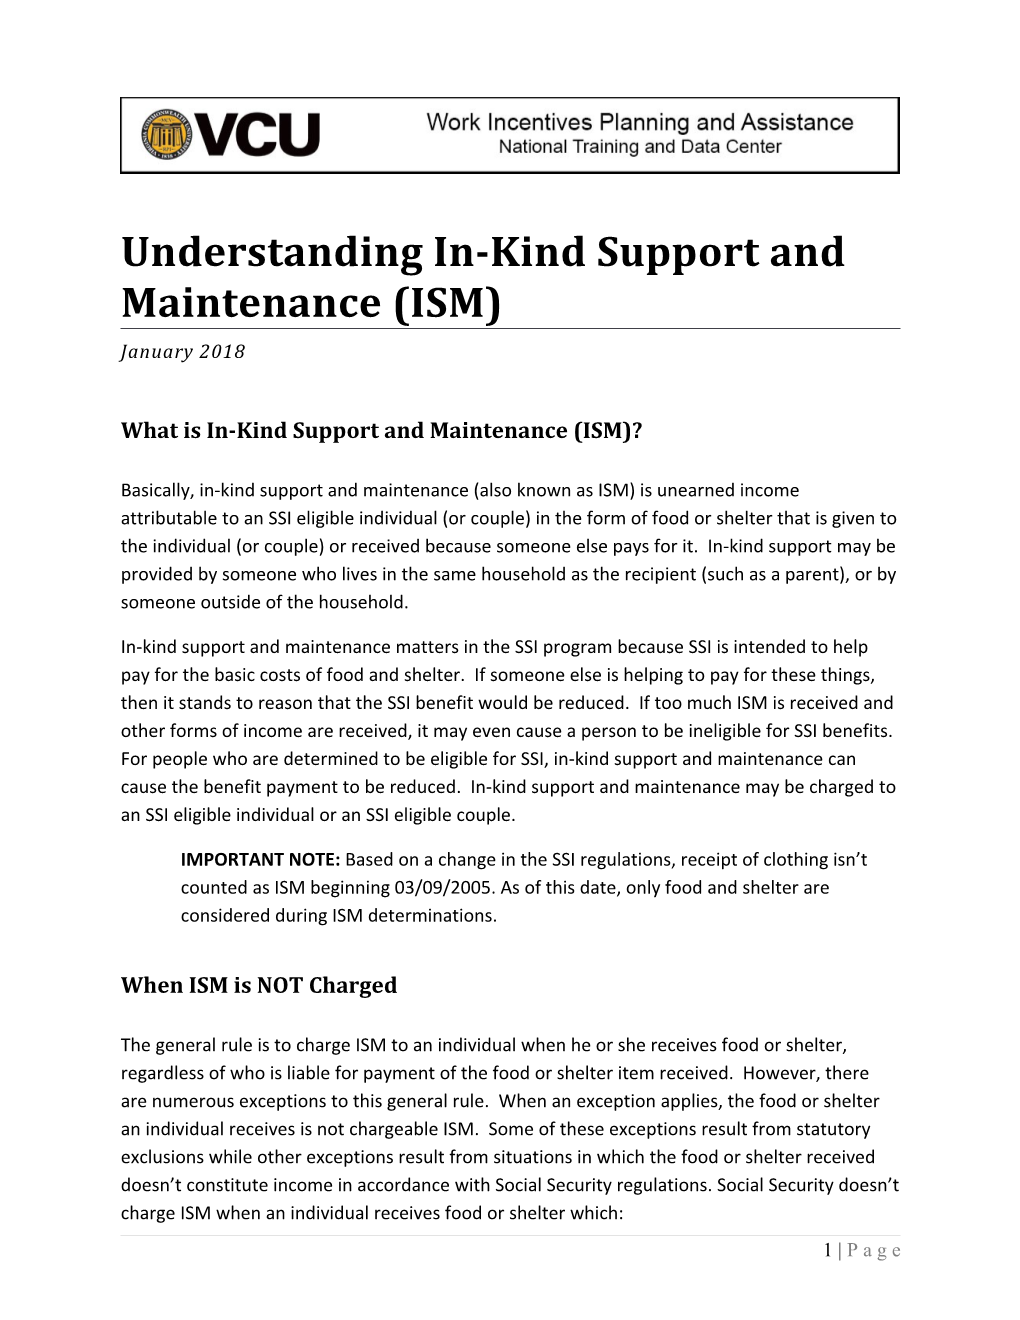 Understanding In-Kind Support and Maintenance (ISM)